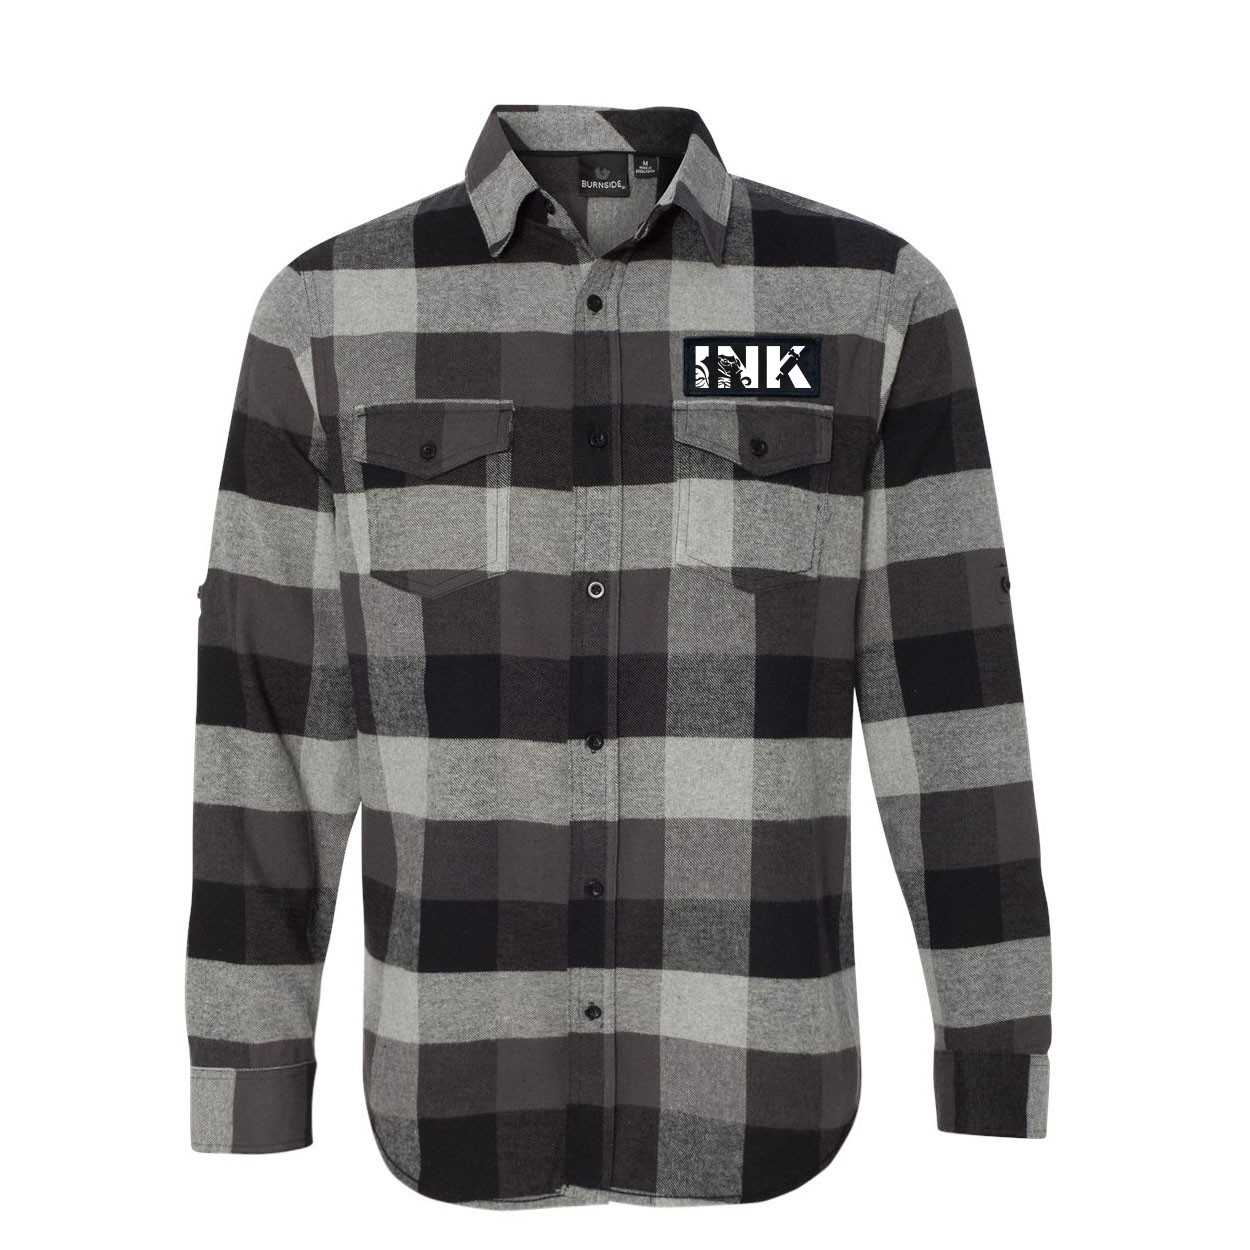 Ink Tattoo Logo Classic Unisex Long Sleeve Woven Patch Flannel Shirt Black/Gray (White Logo)